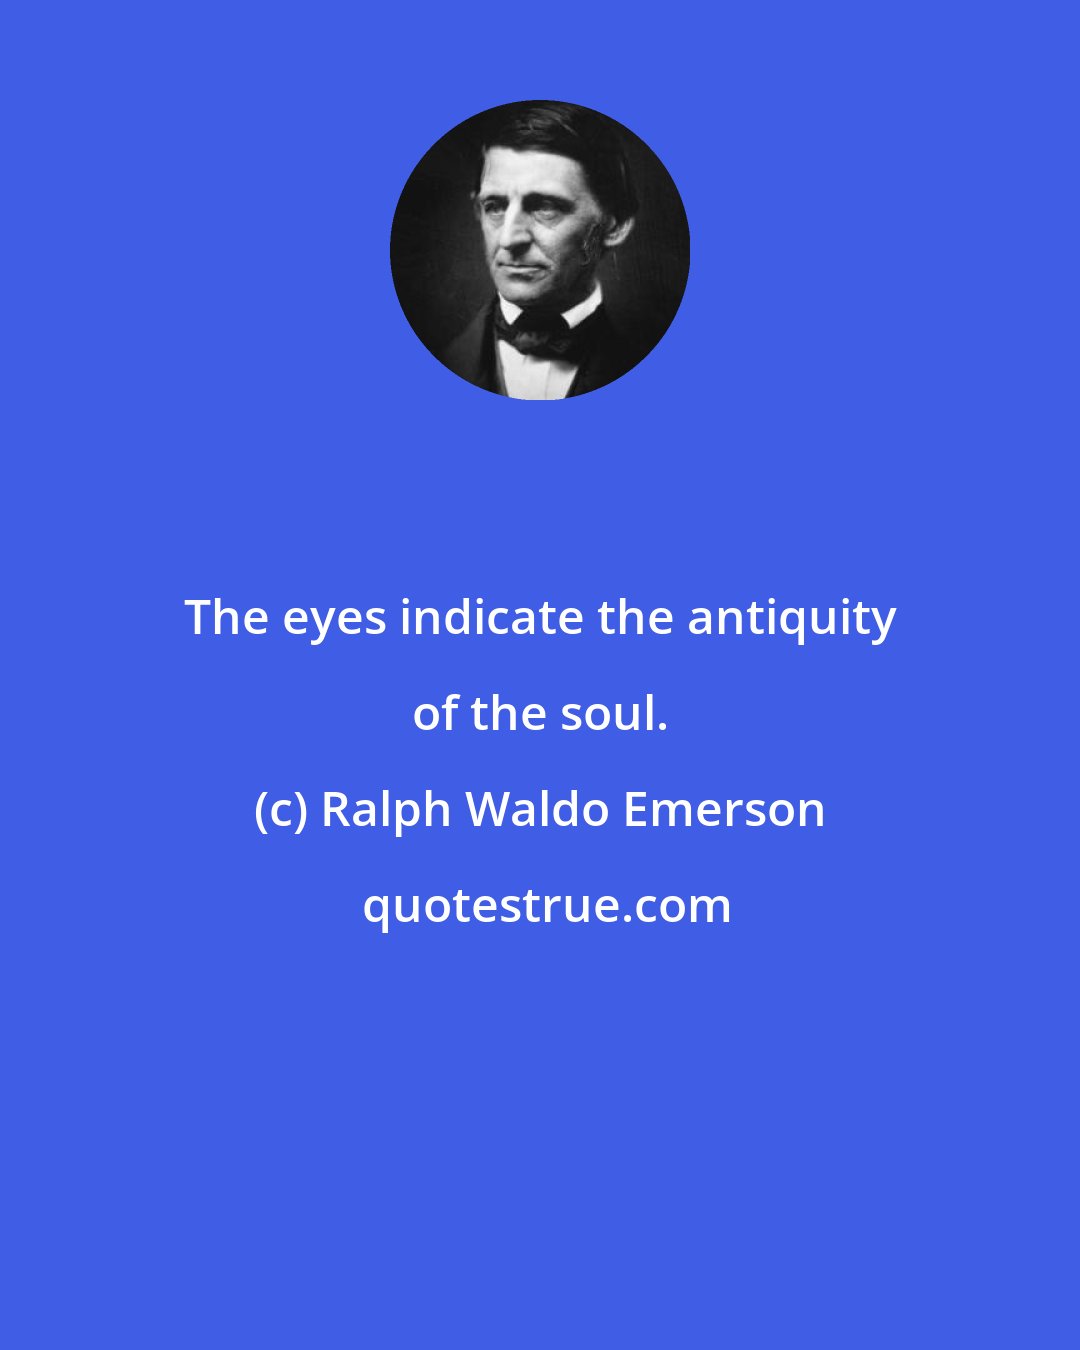 Ralph Waldo Emerson: The eyes indicate the antiquity of the soul.